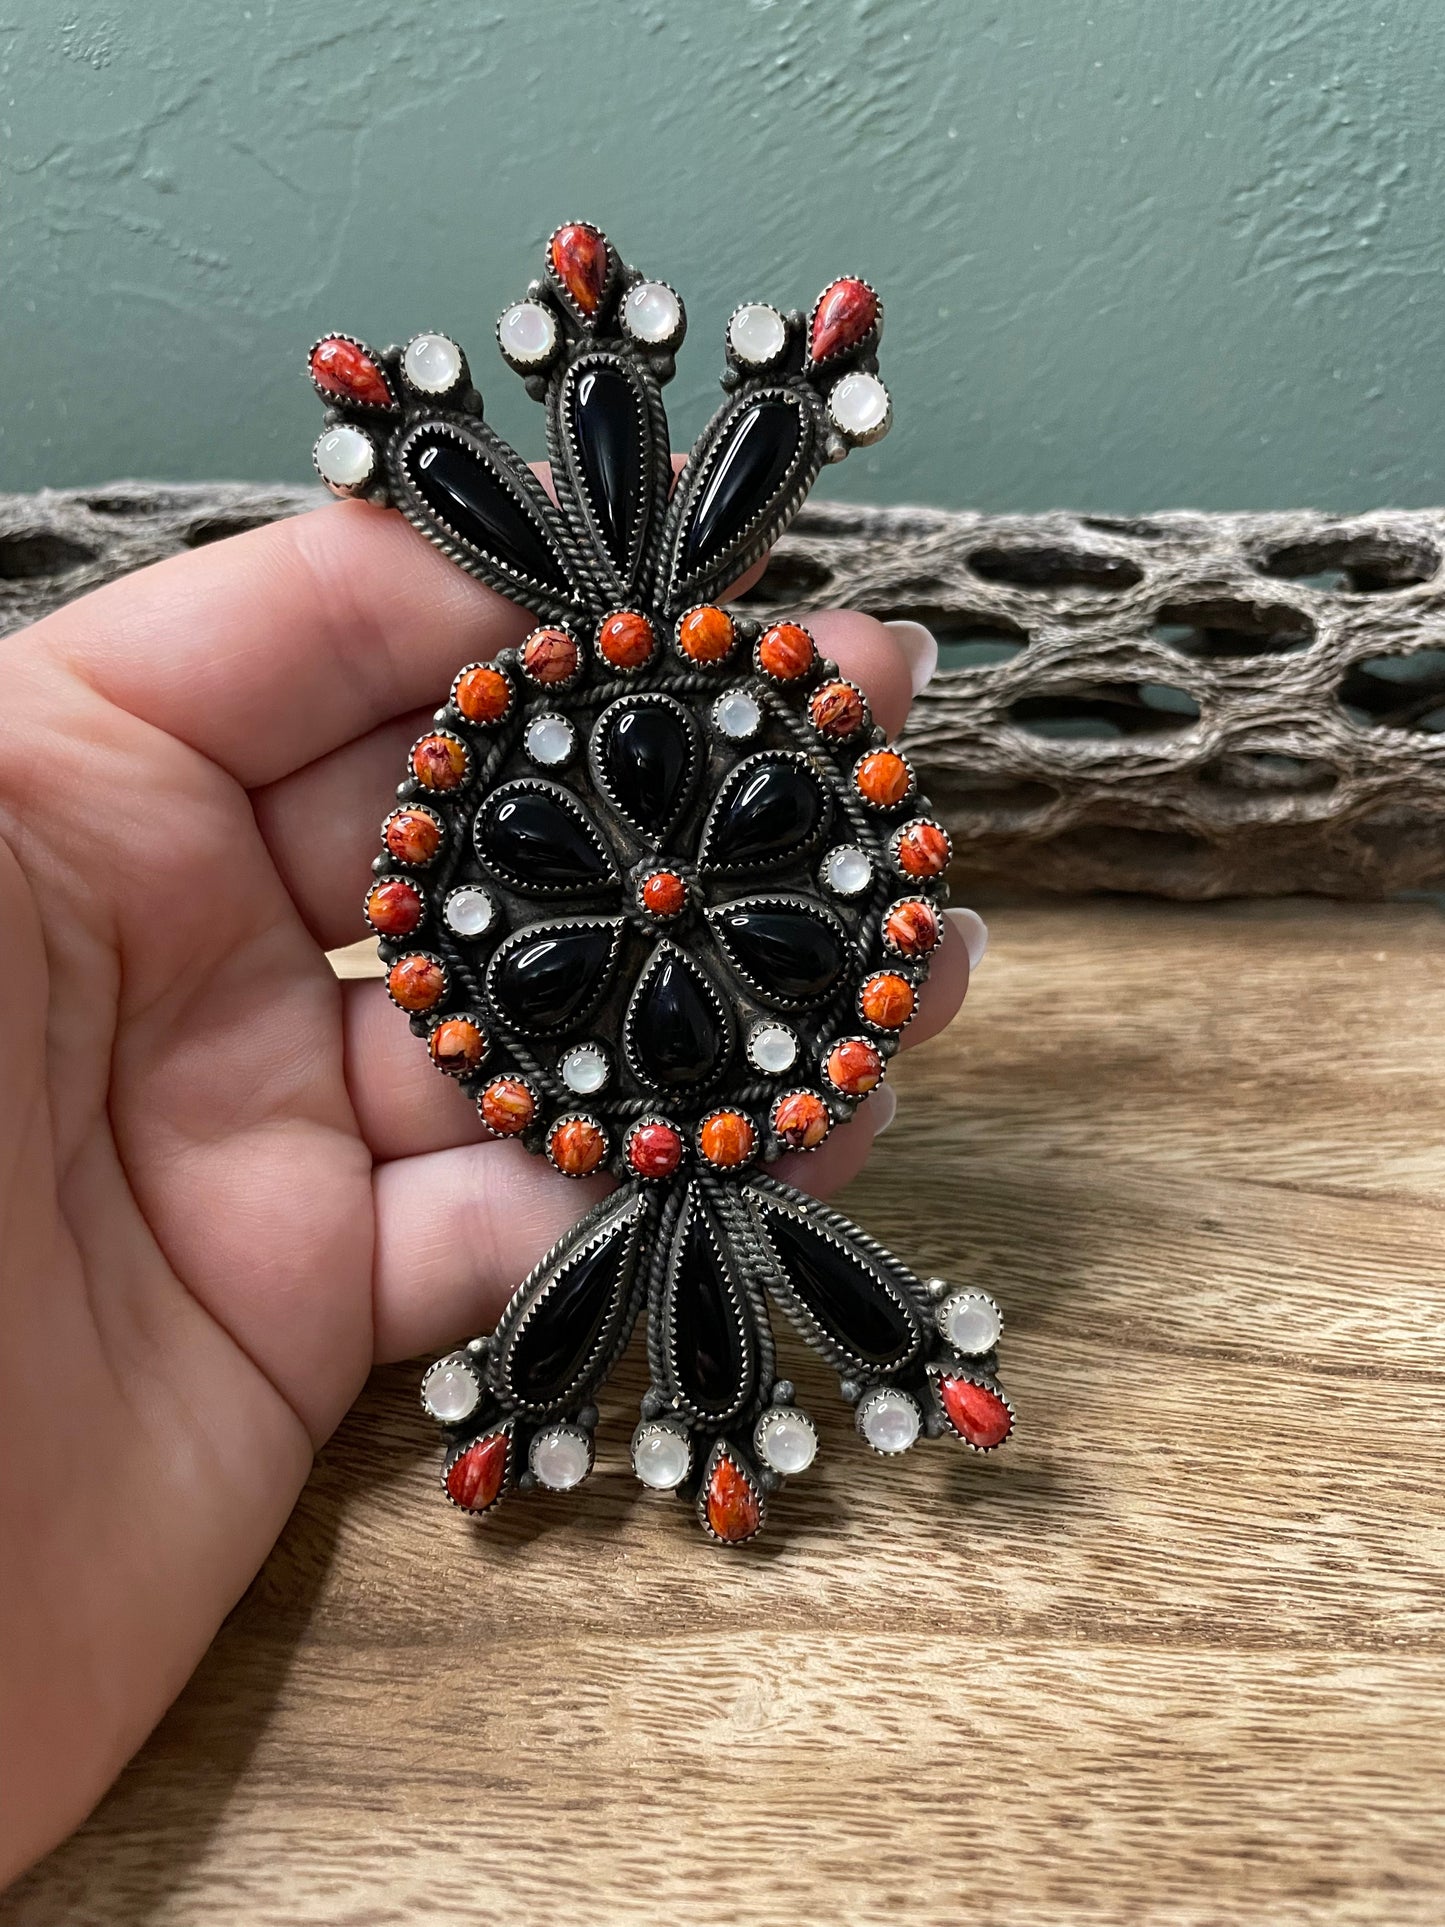 Navajo Sterling Silver Black Onyx And Orange Spiny Statement Ring Size 8 By Devon Brown